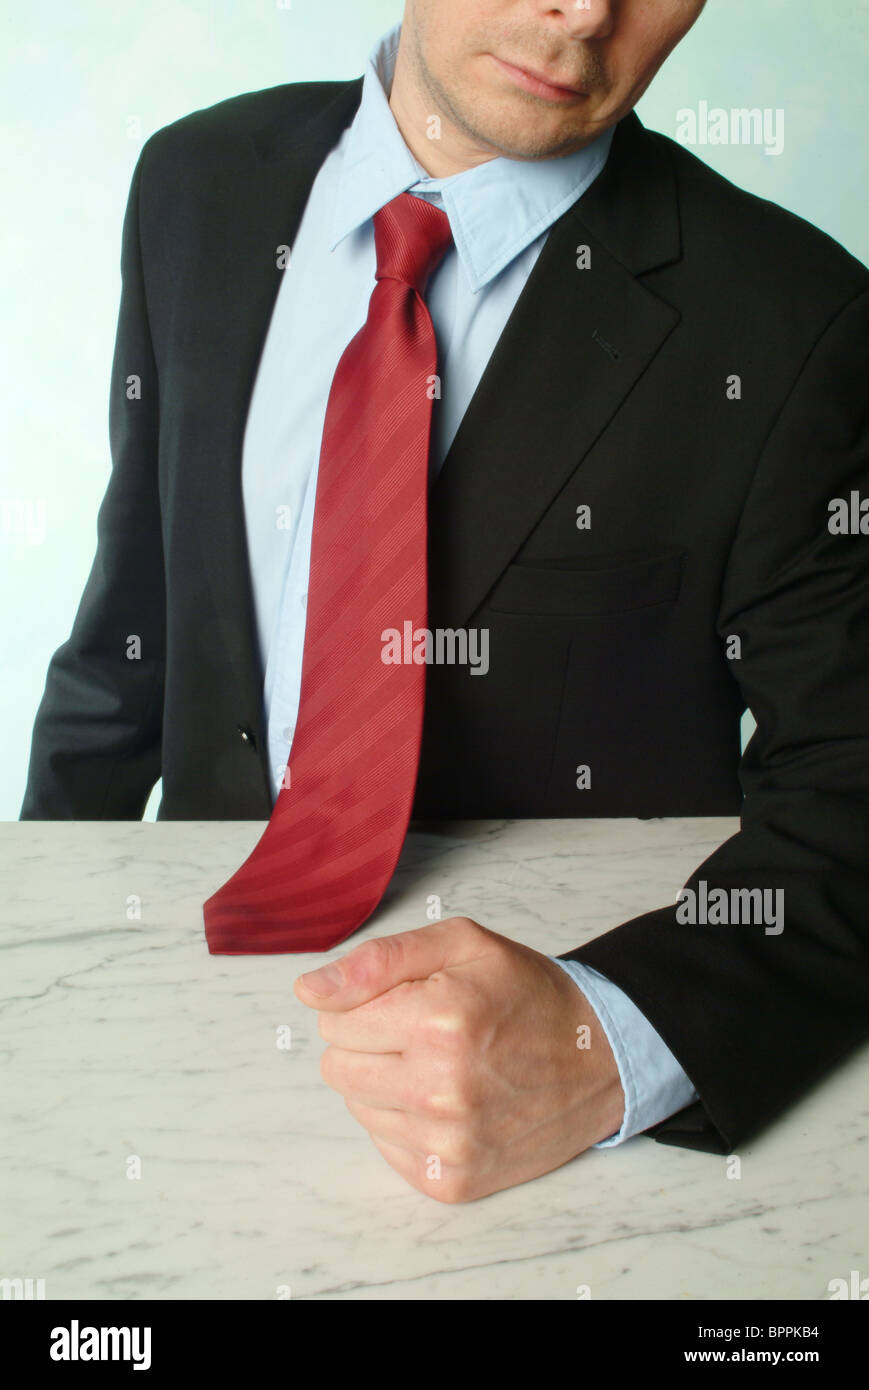 Man with clenched fist Stock Photo